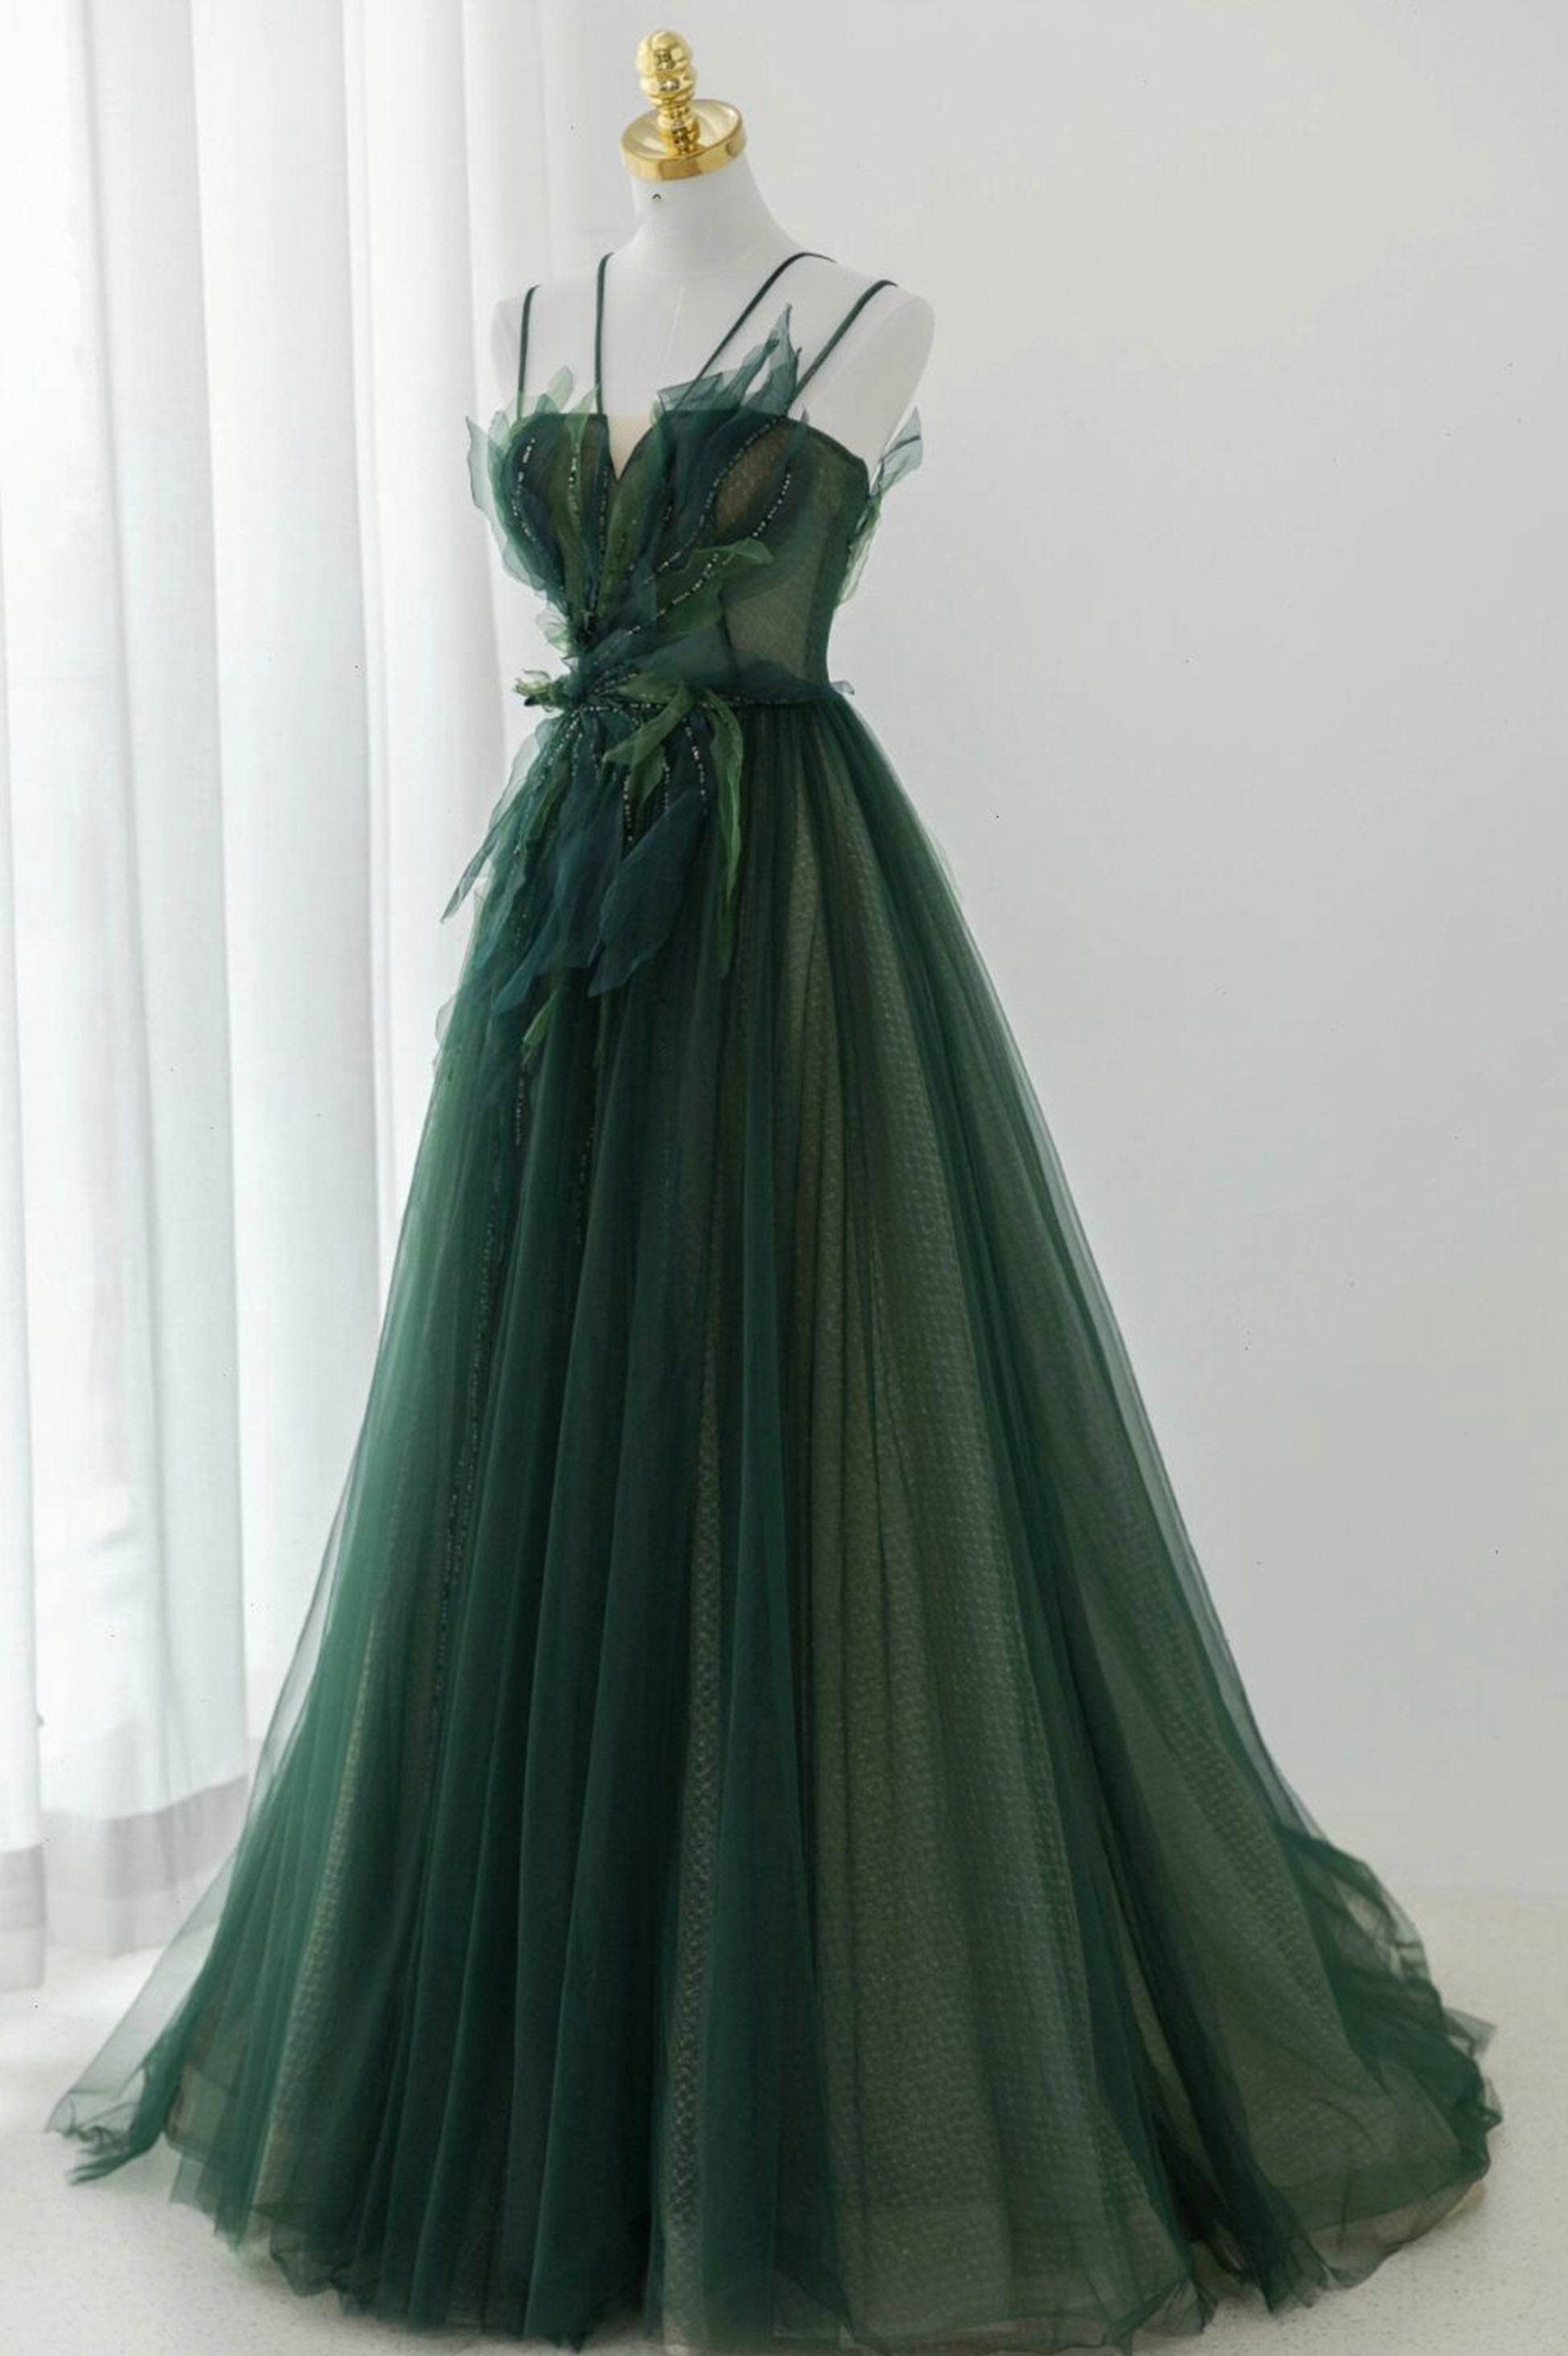 Green Tulle Long A-Line Corset Prom Dress, Spaghetti Straps Evening Dress outfit, Evening Dress Gowns